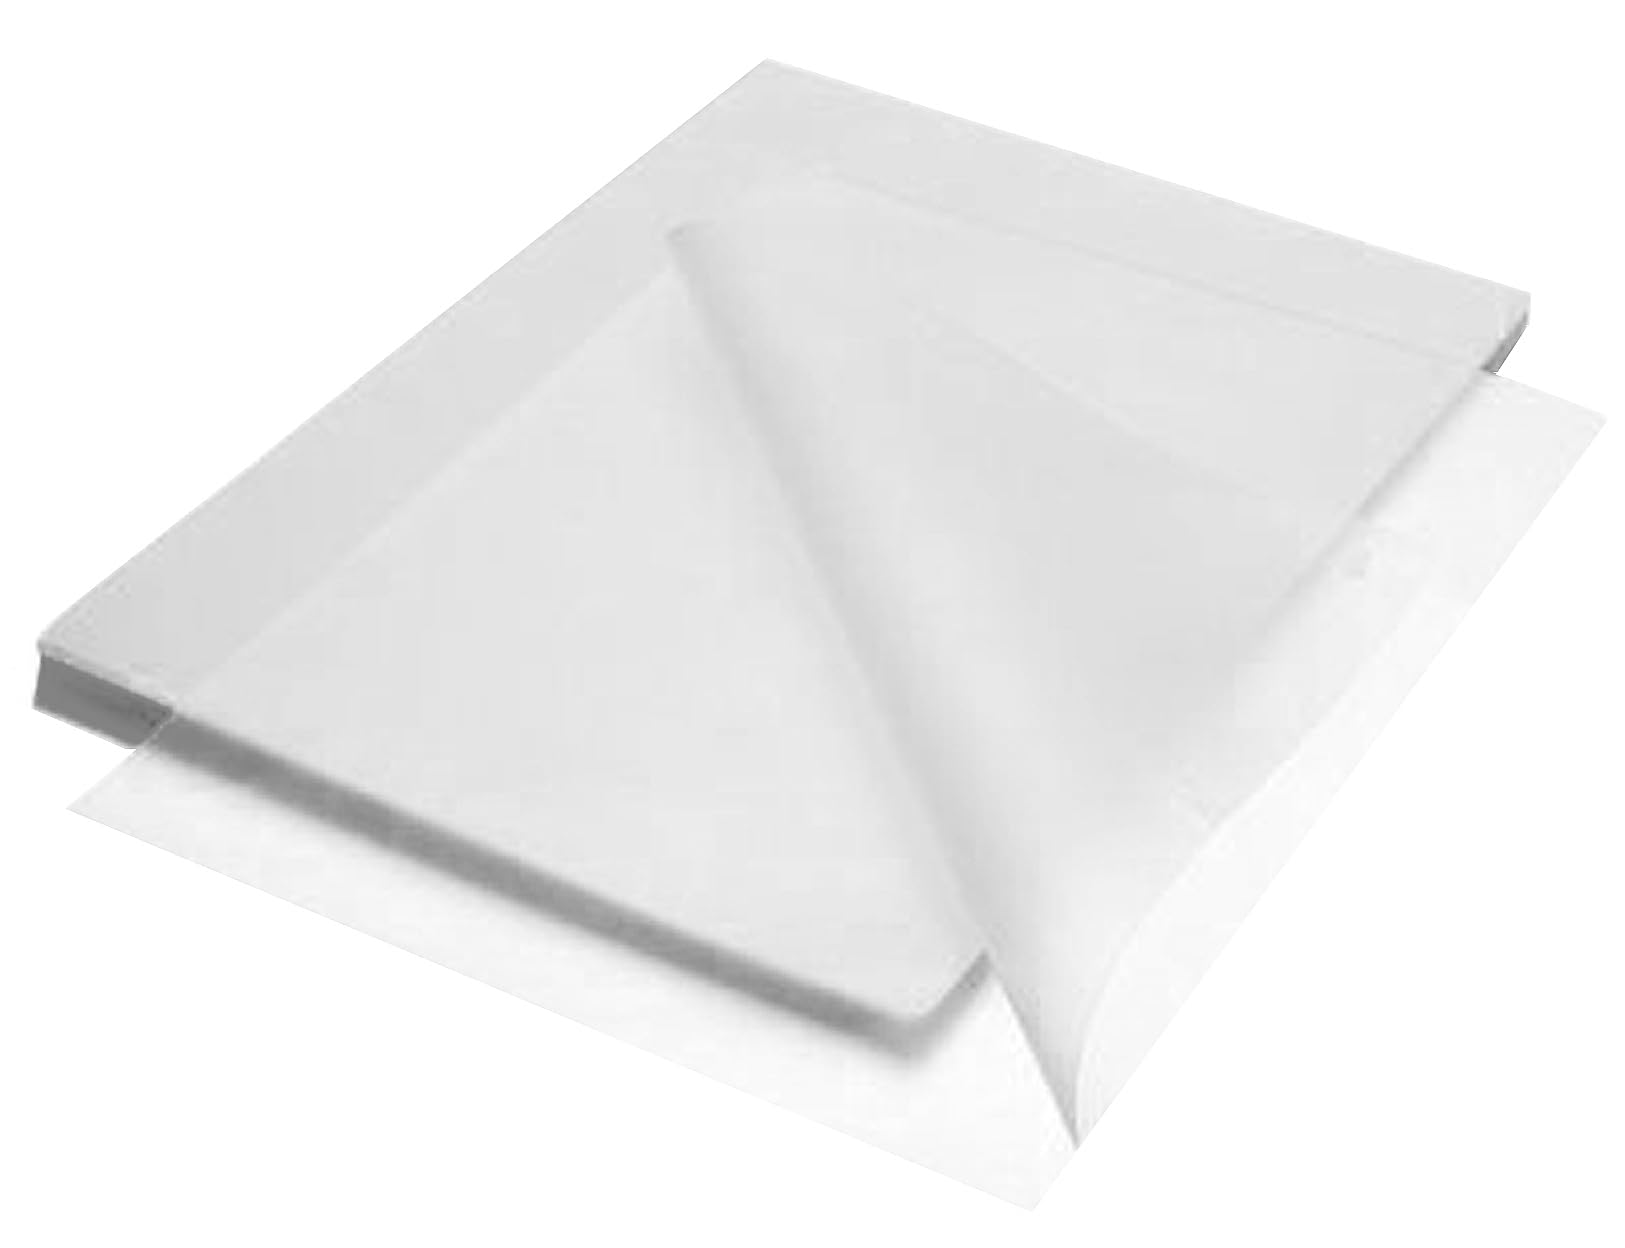 Best-Lam Hot Laminating Pouches 3 Mil (Pk of 100) 18 x 24-inch Map Size Clear Glossy